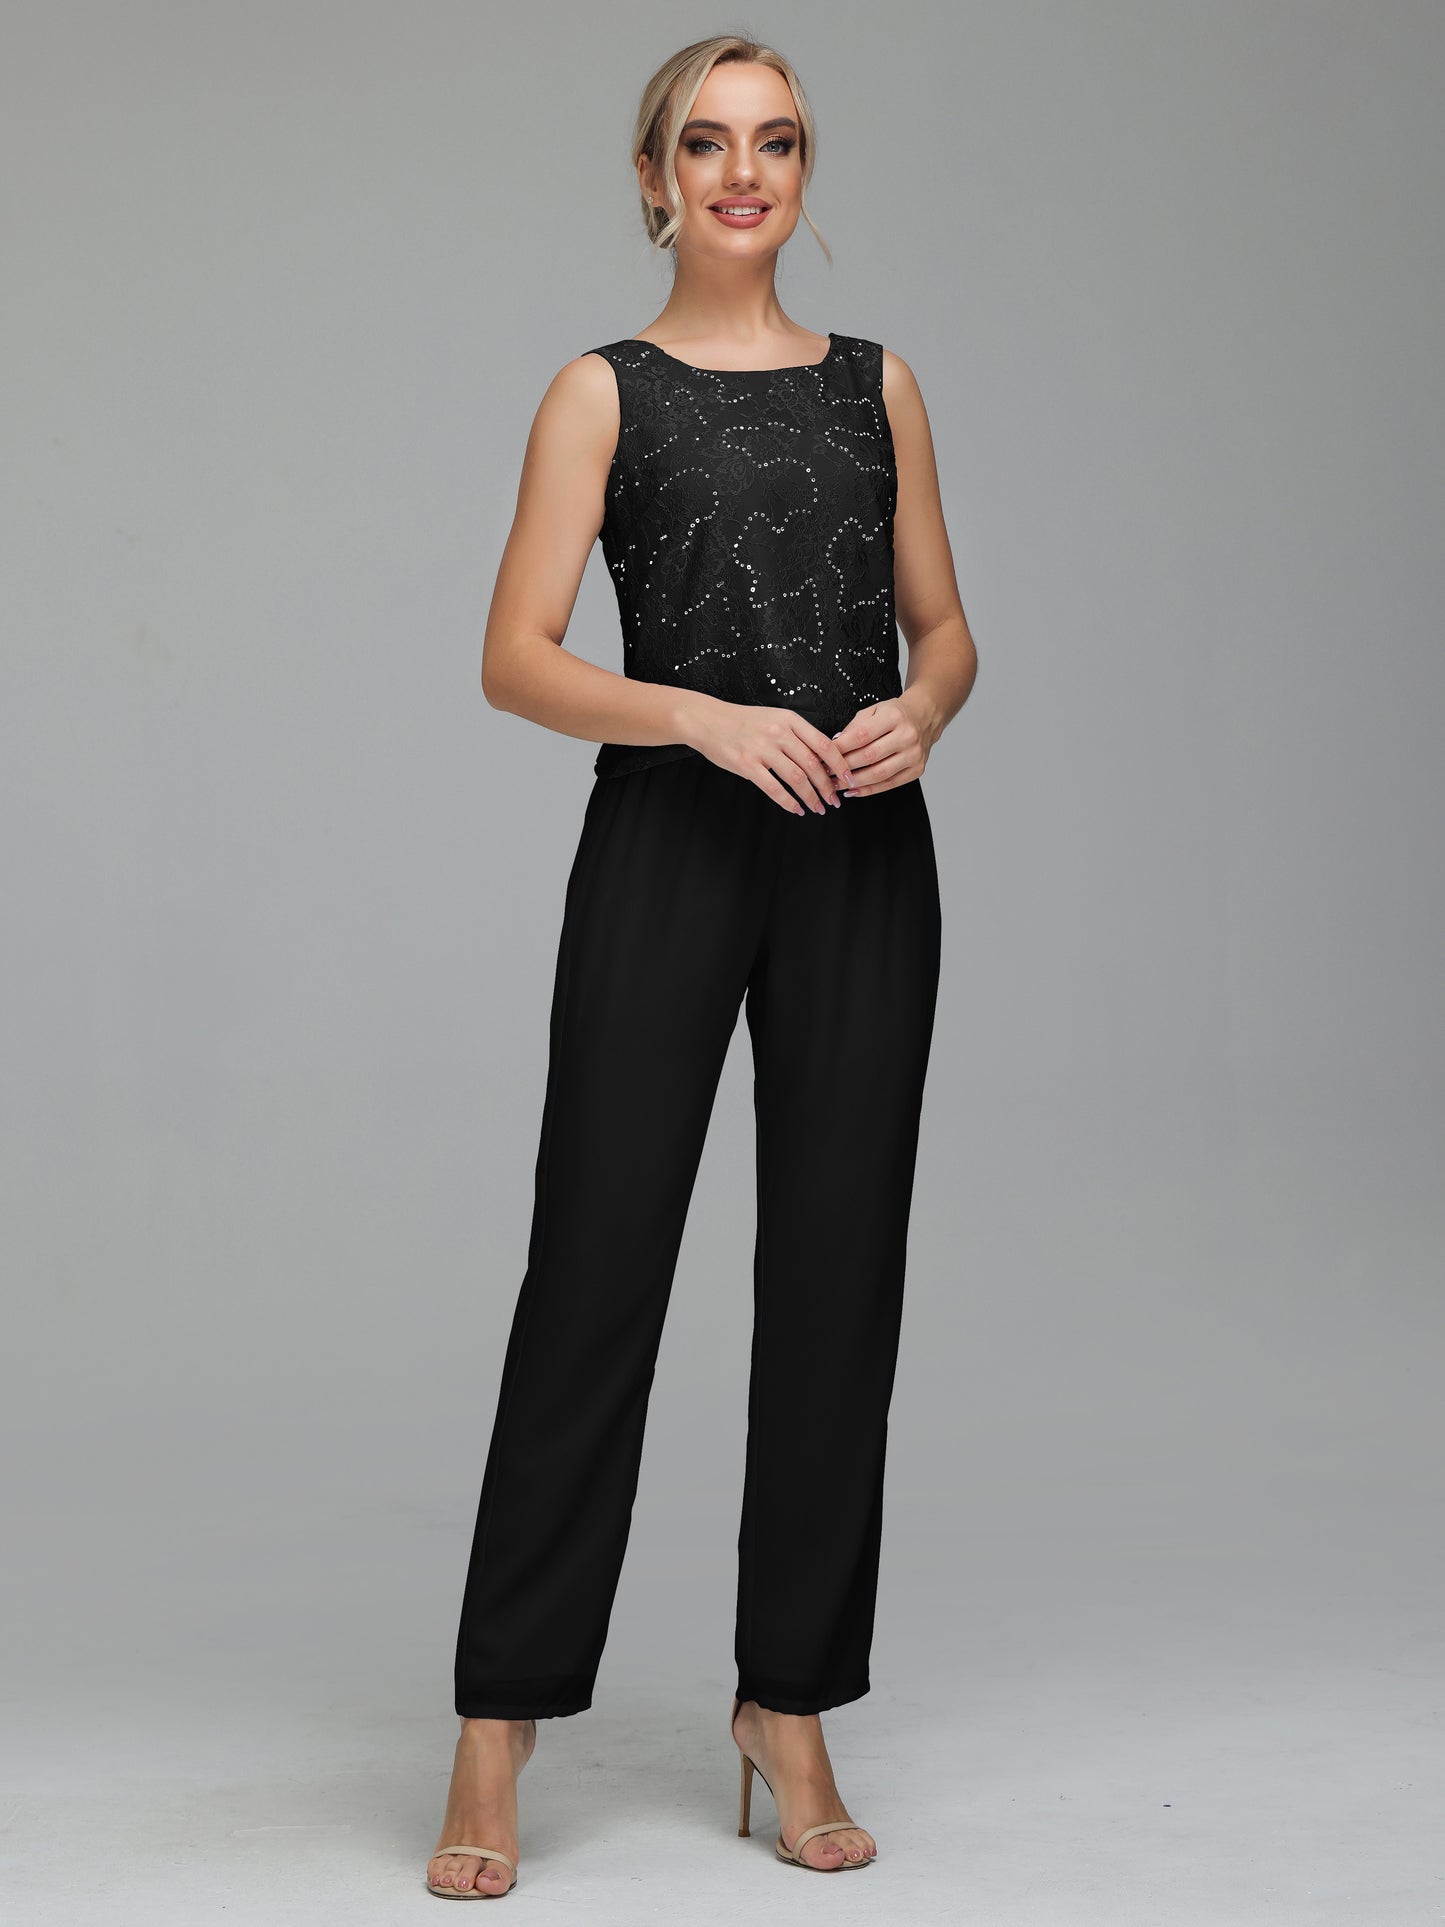 Jumpsuit Separates Scoop Illusion Floor-Length Chiffon Lace Mother of the Bride Dress